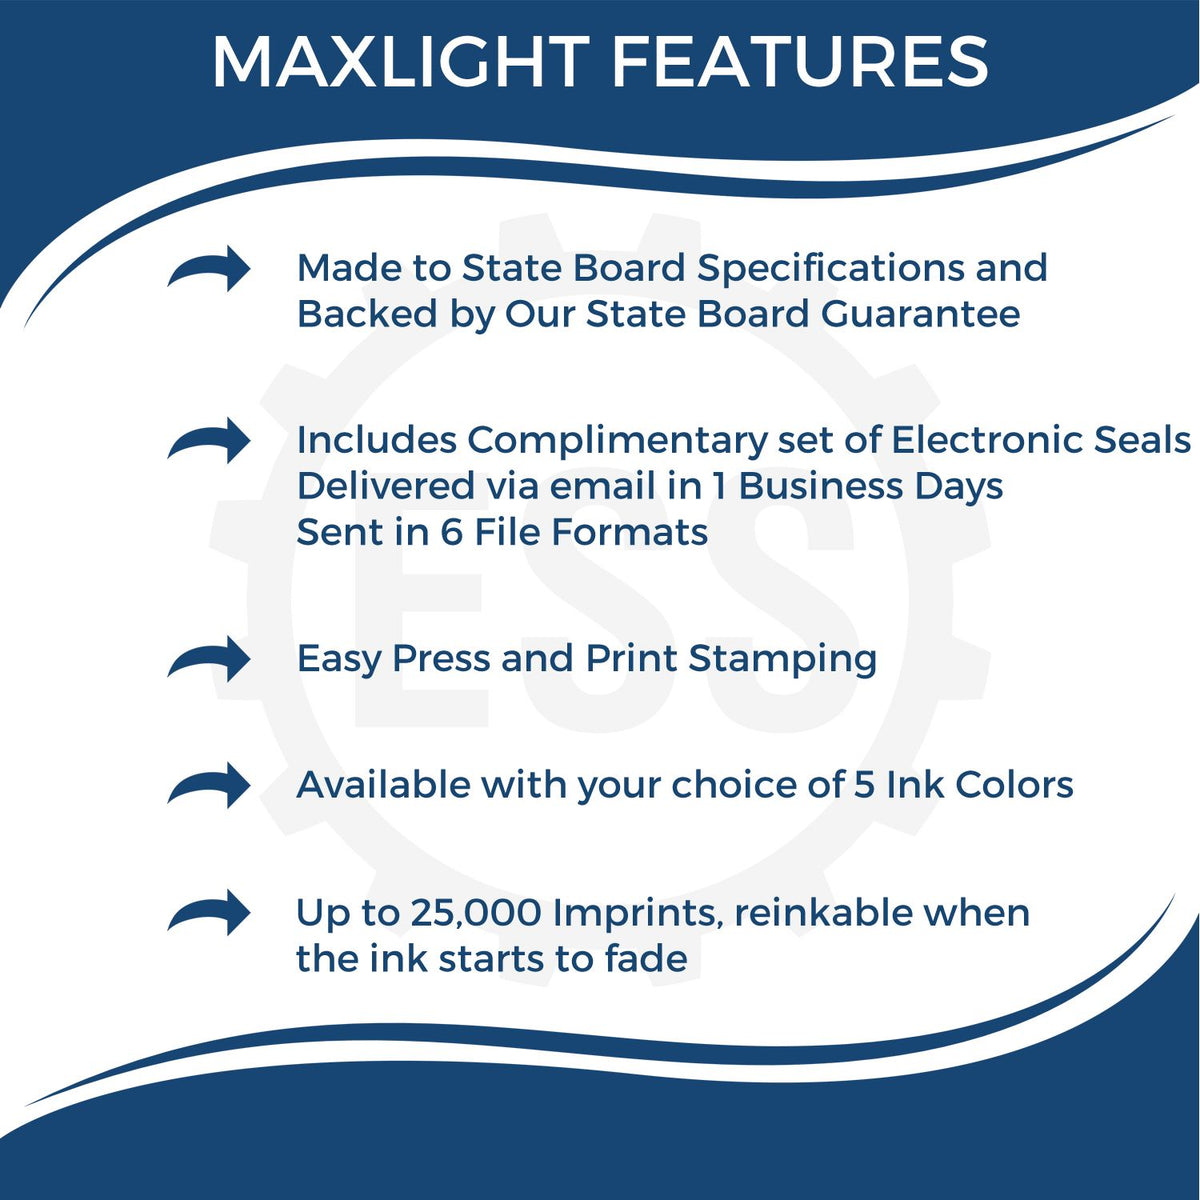 A picture of an infographic highlighting the selling points for the Premium MaxLight Pre-Inked Utah Landscape Architectural Stamp